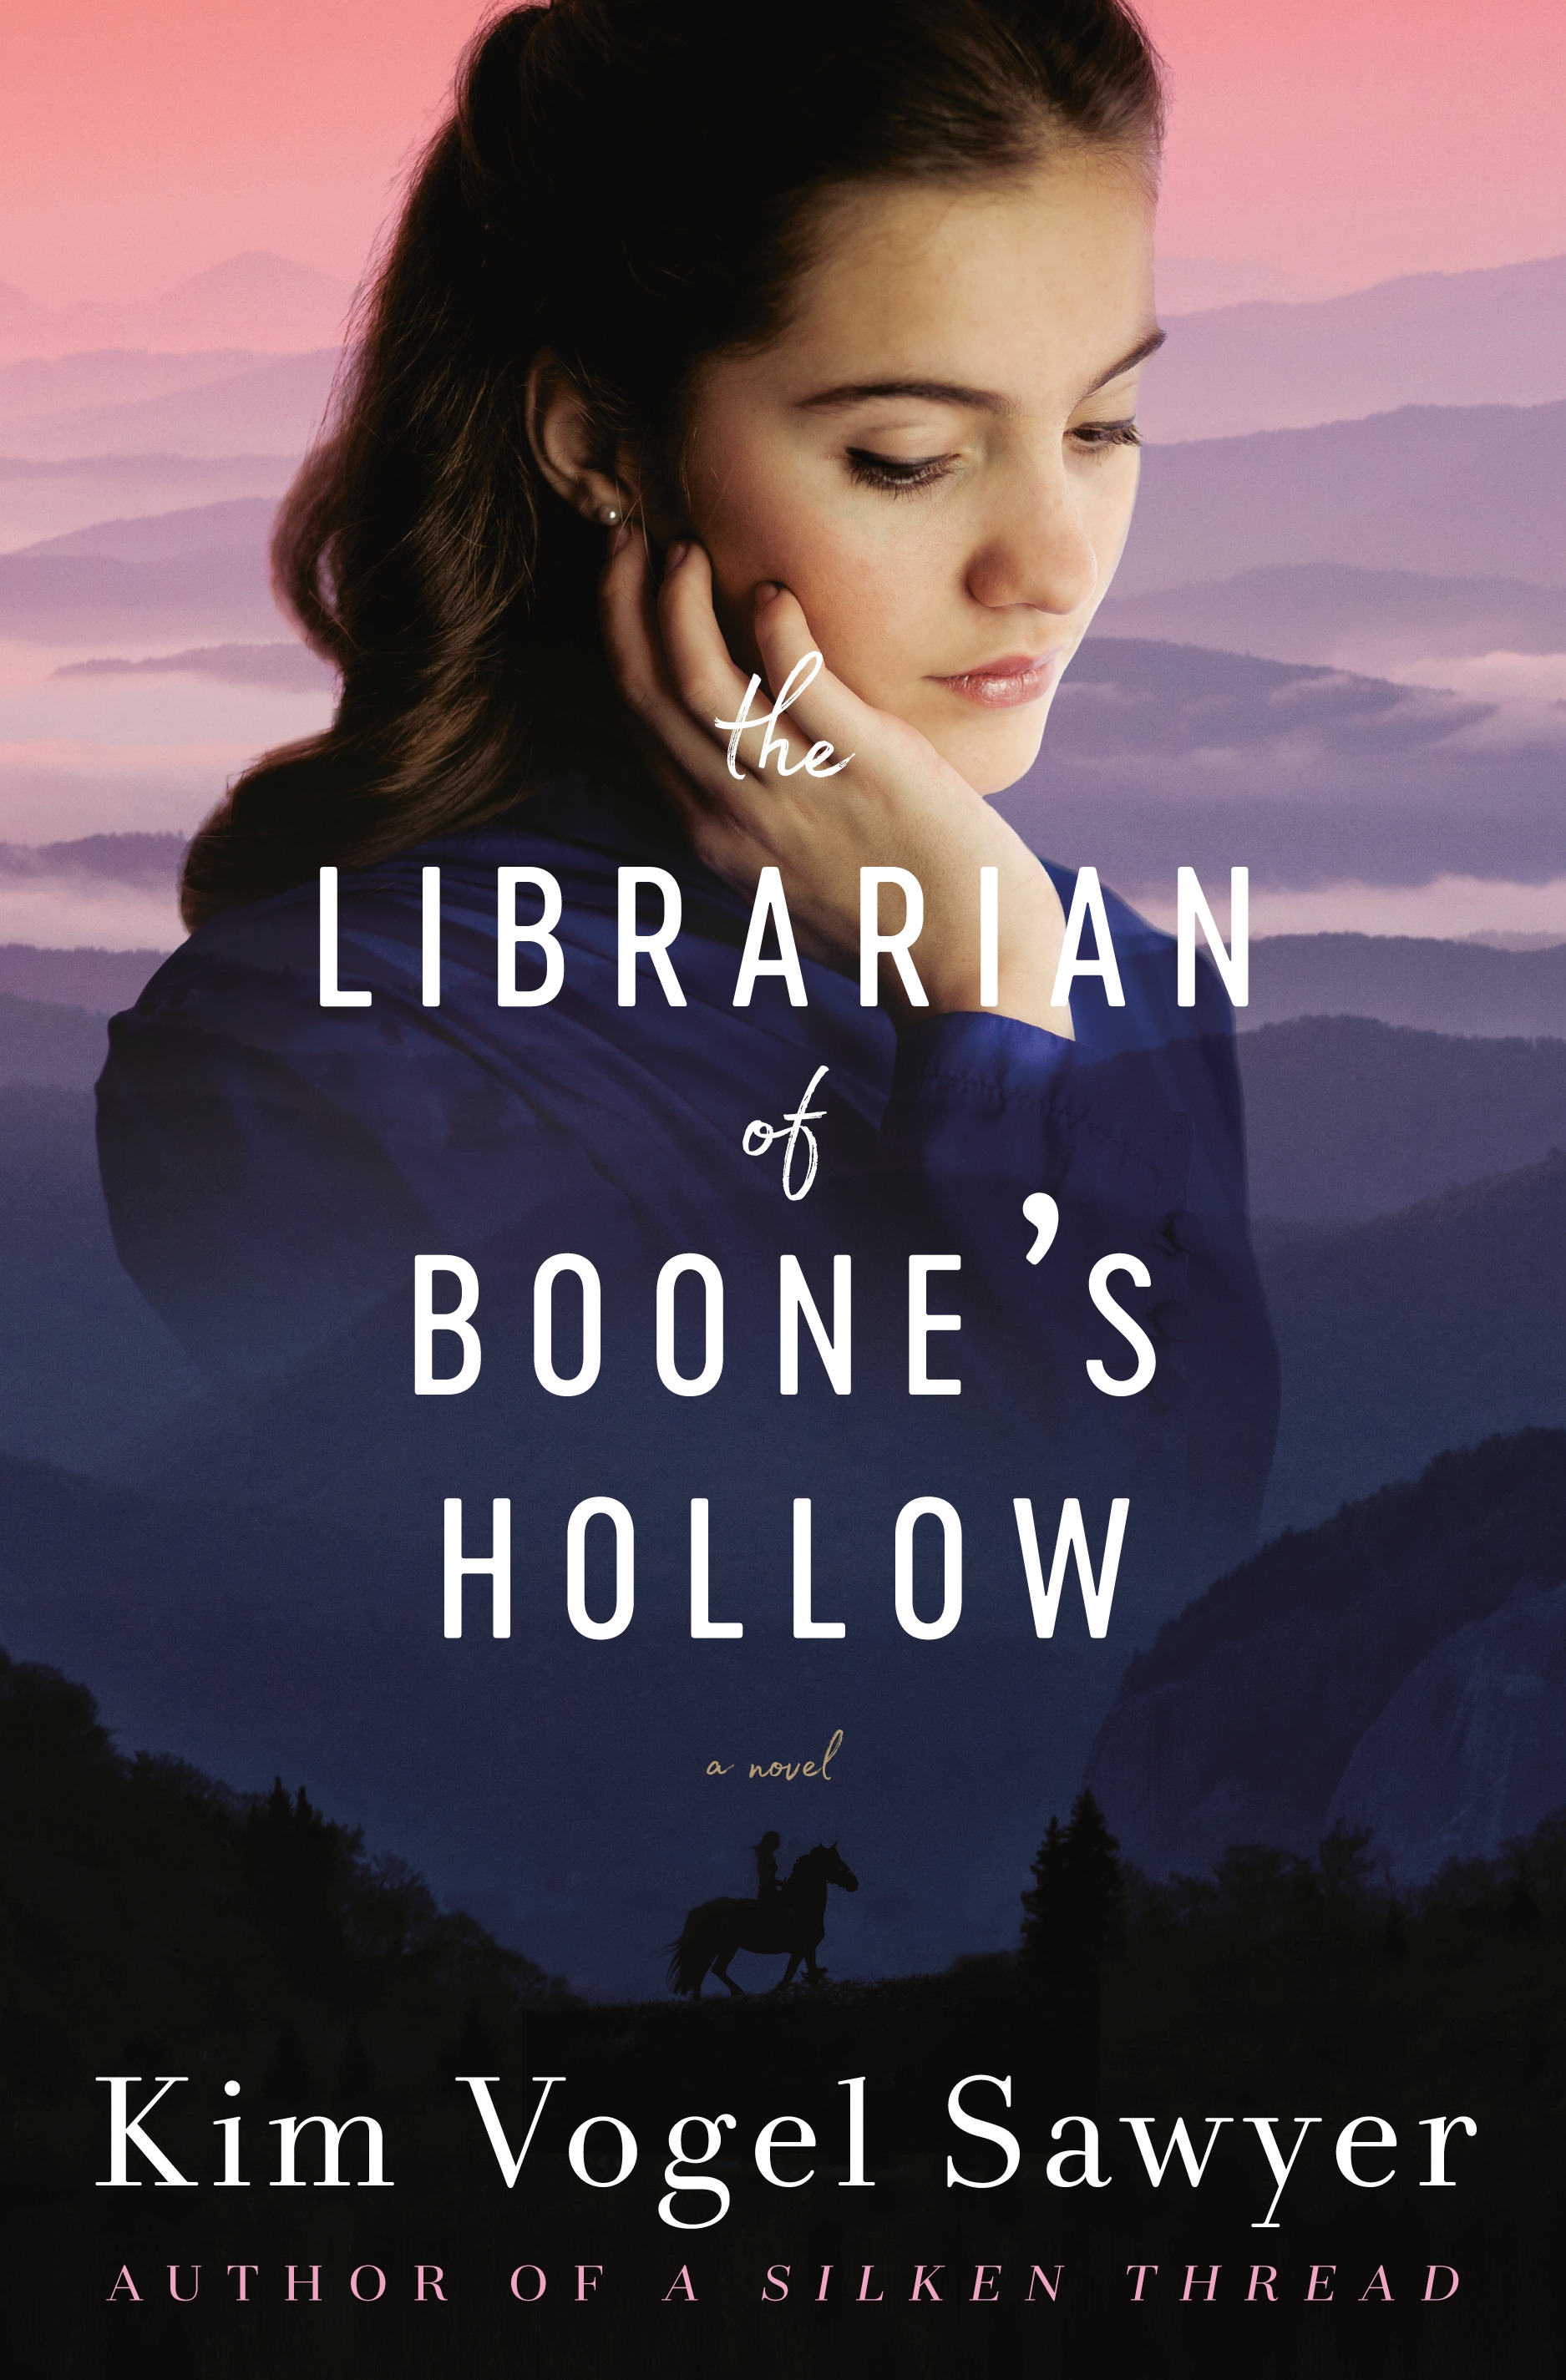 The Librarian of Boone's Hollow by Kim Vogel Sawyer - Penguin